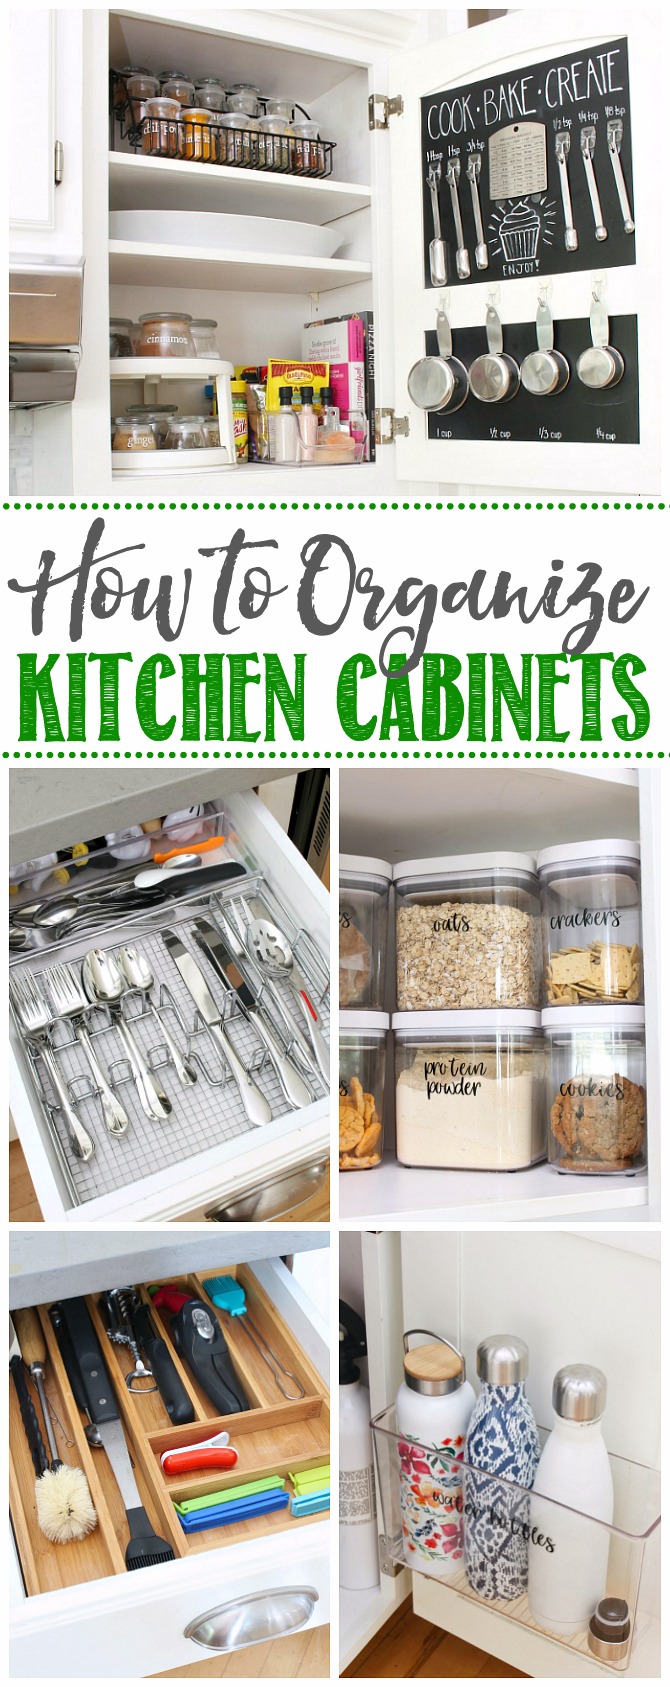 https://www.cleanandscentsible.com/wp-content/uploads/2020/07/How-to-Organize-Kitchen-Cabinets.jpg